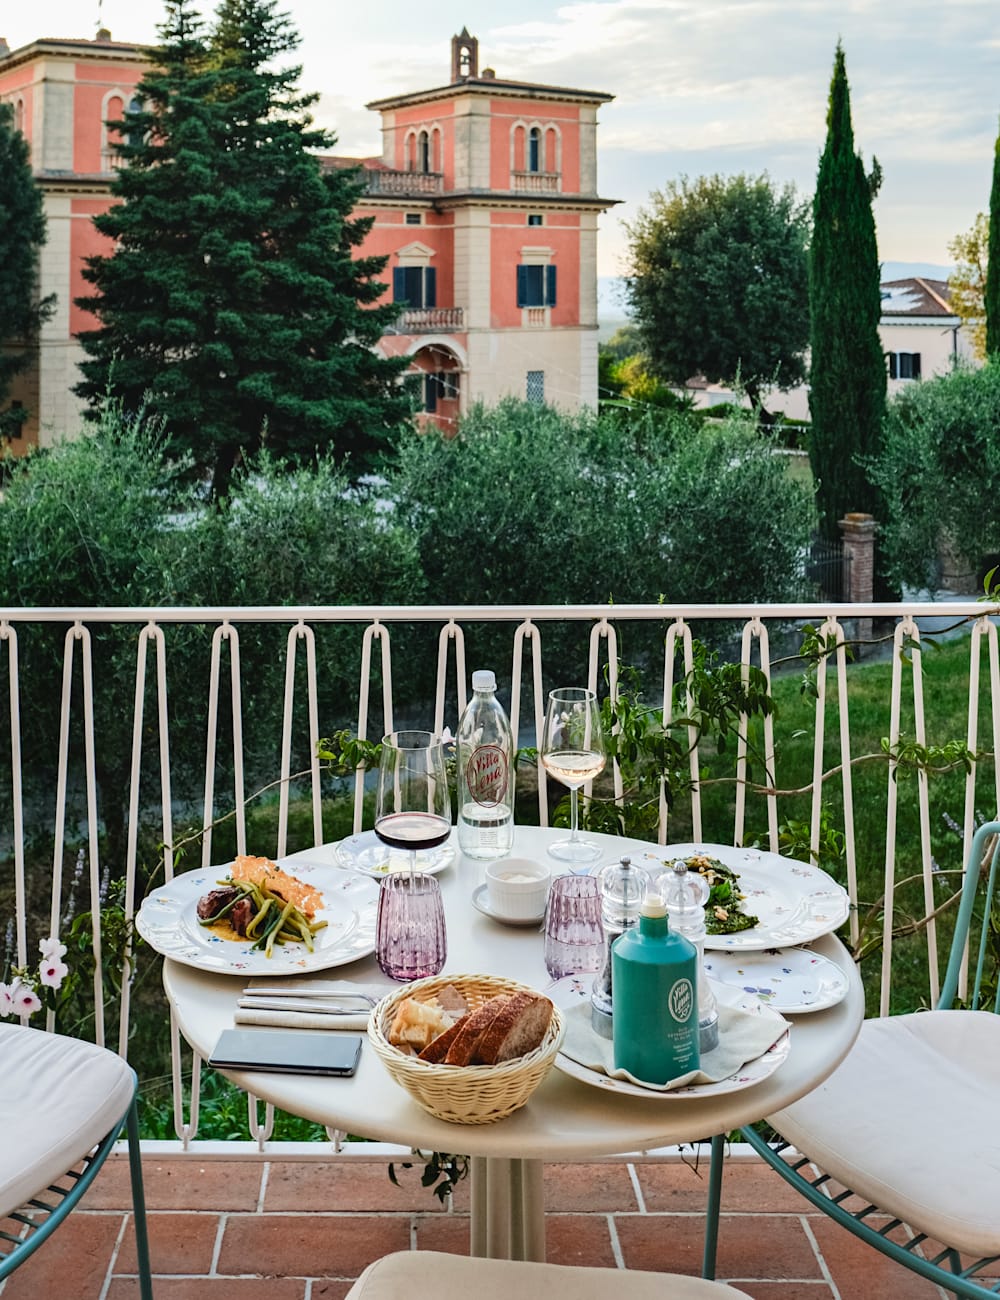 Meal for two served outside on a terrace at Villa Lena hotel, Tuscany